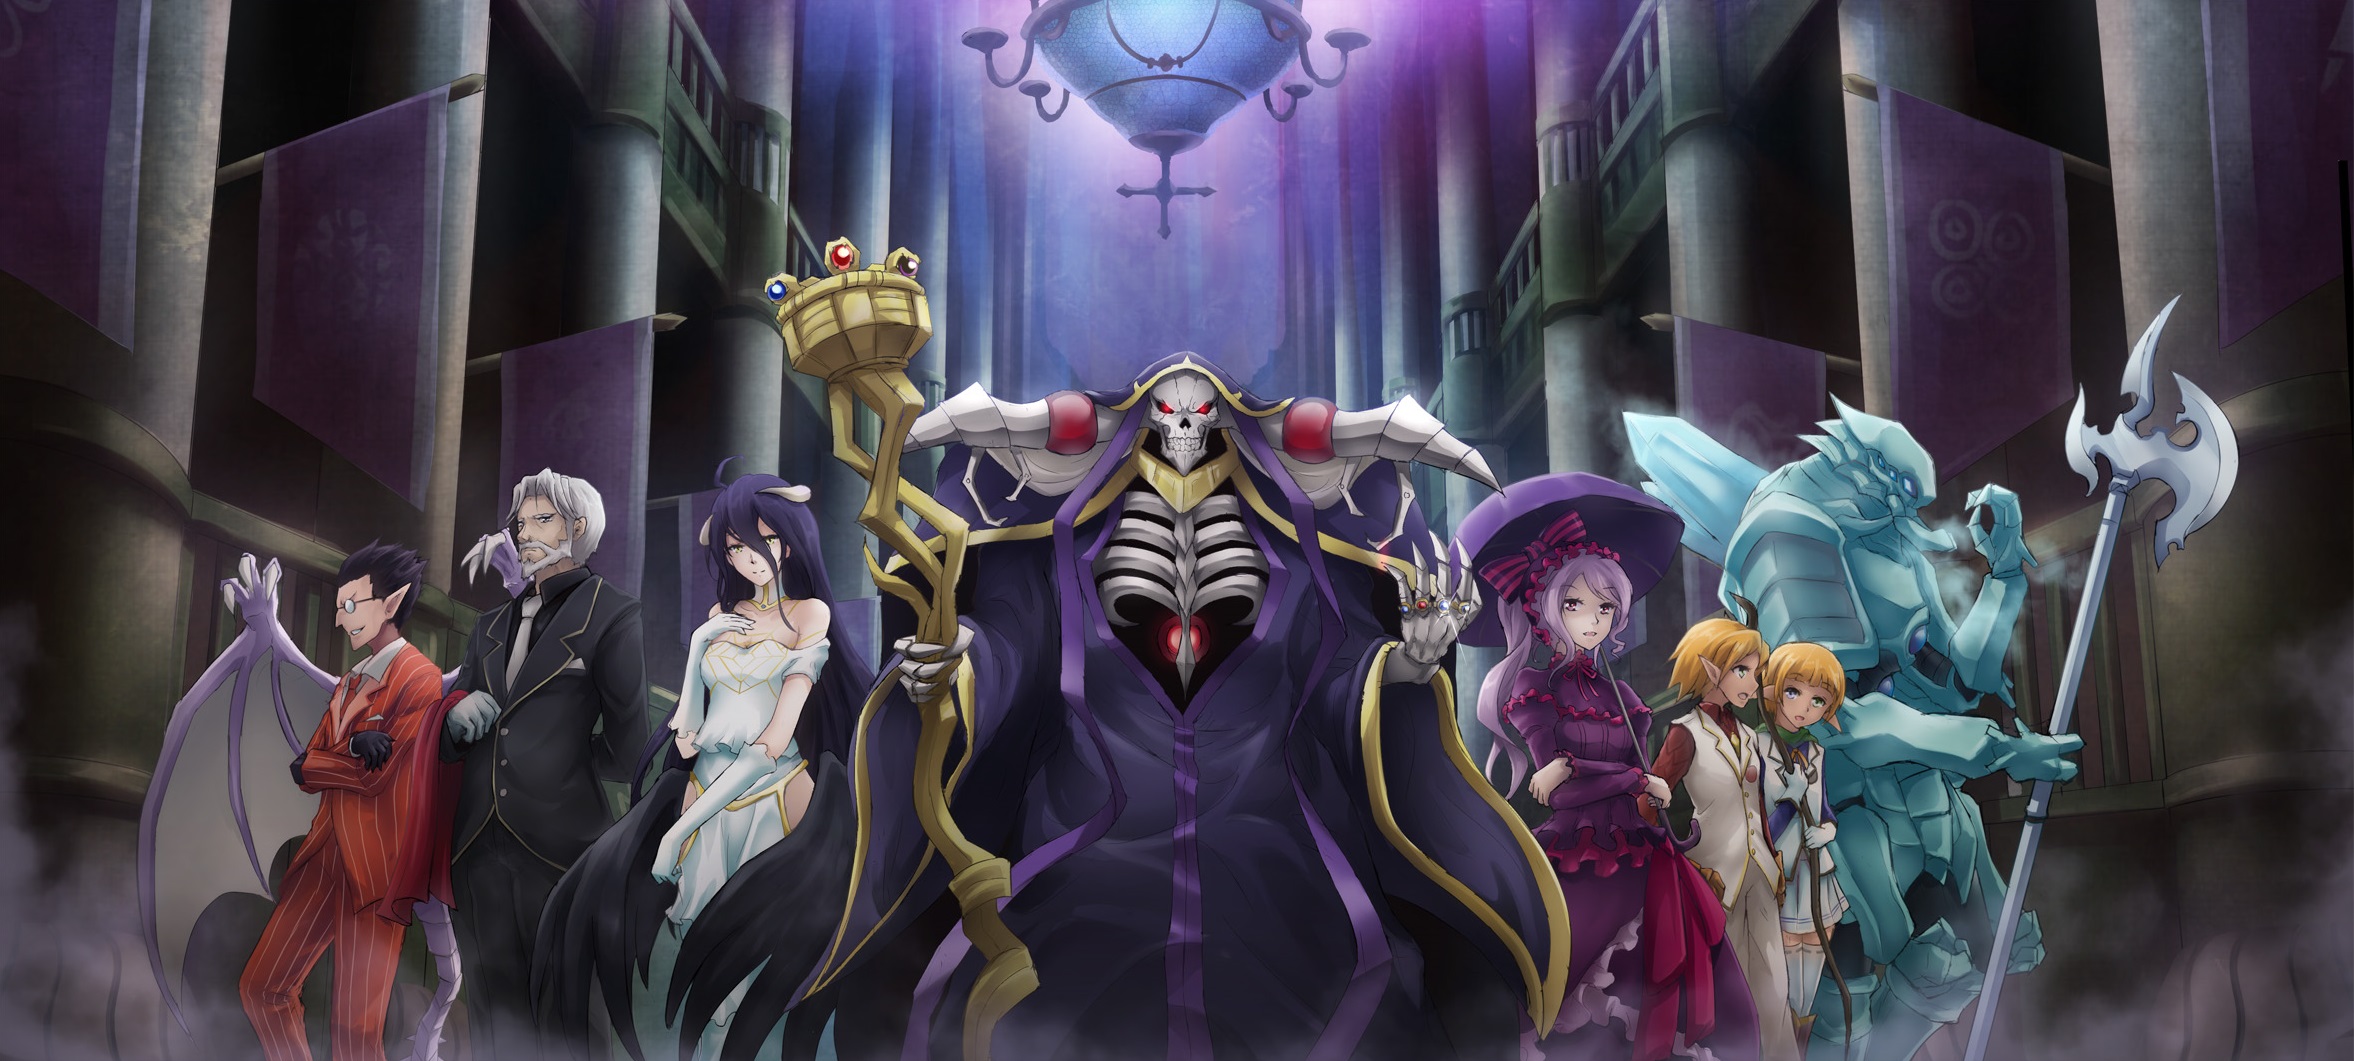 Ainz Ooal Gown Albedo Overlord Aura Bella Fiora Cocytus Overlord Demiurge Overlord Great Tomb Of Naz 2354x1061